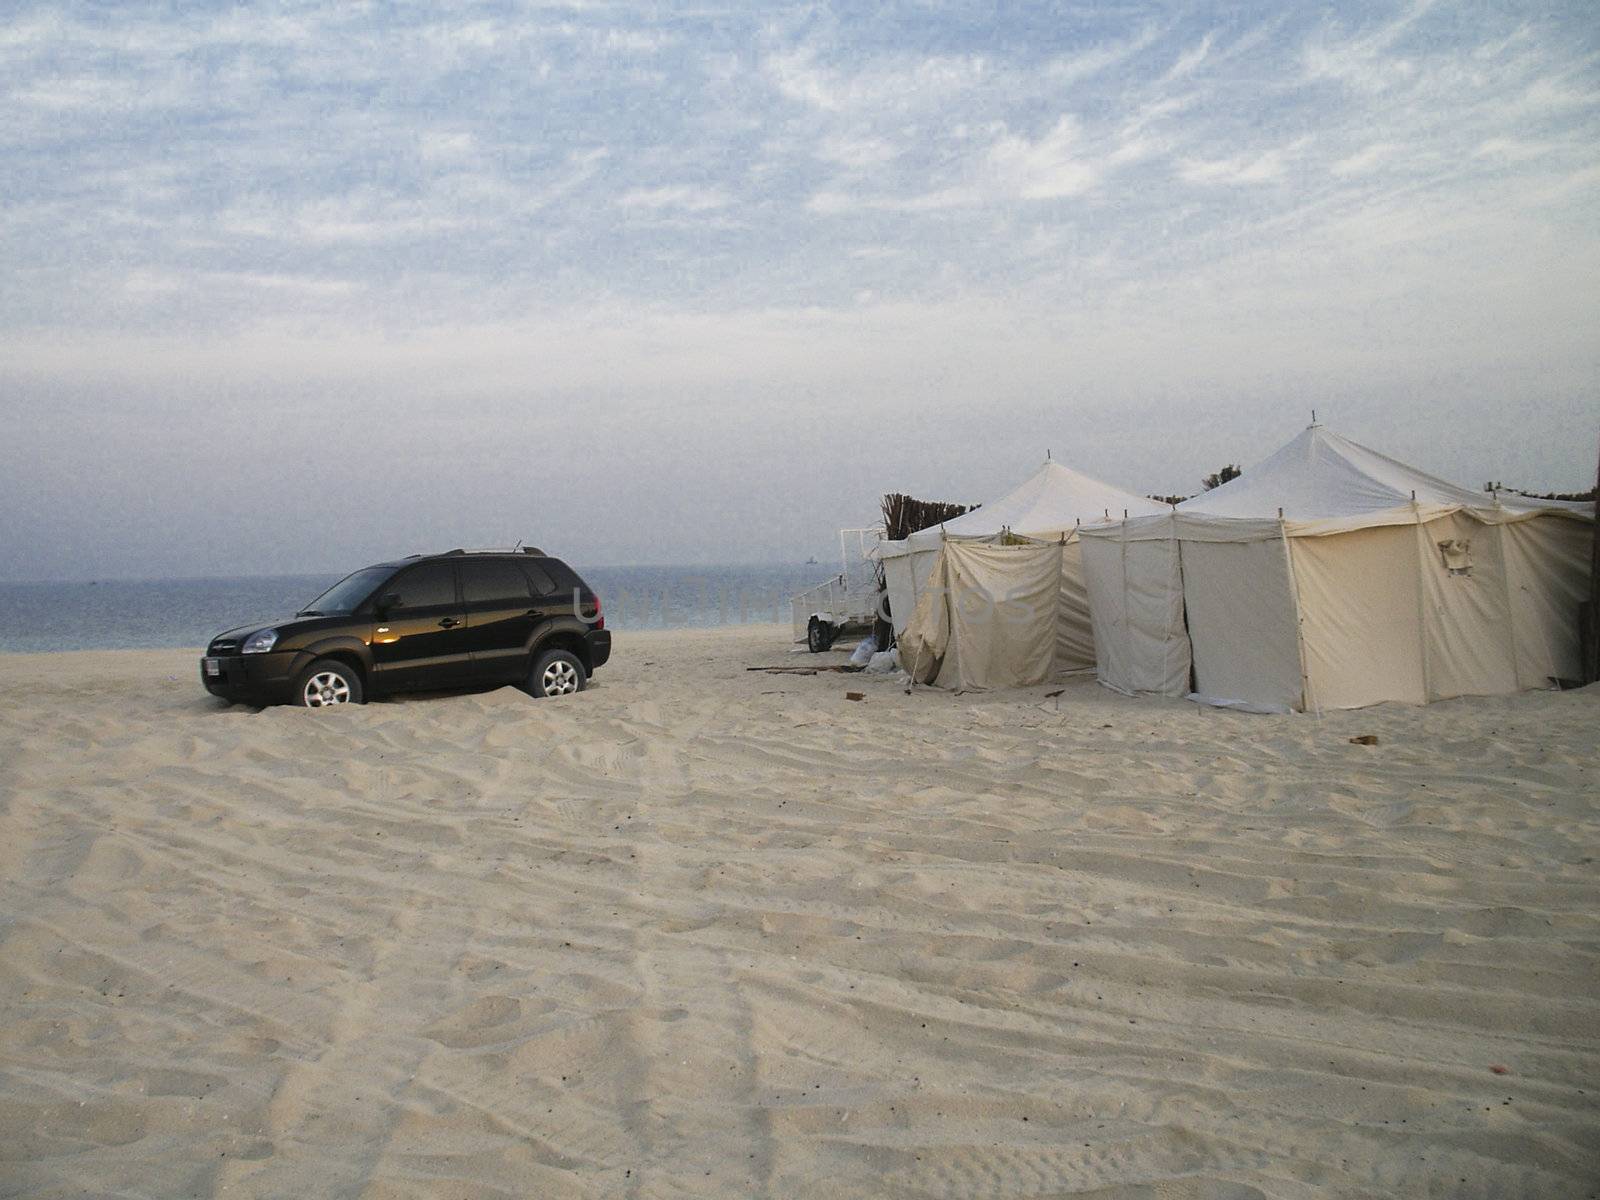 Camping at the beach for Eid in Dubai at Jebel Ali Free Zone 3 by cvail73